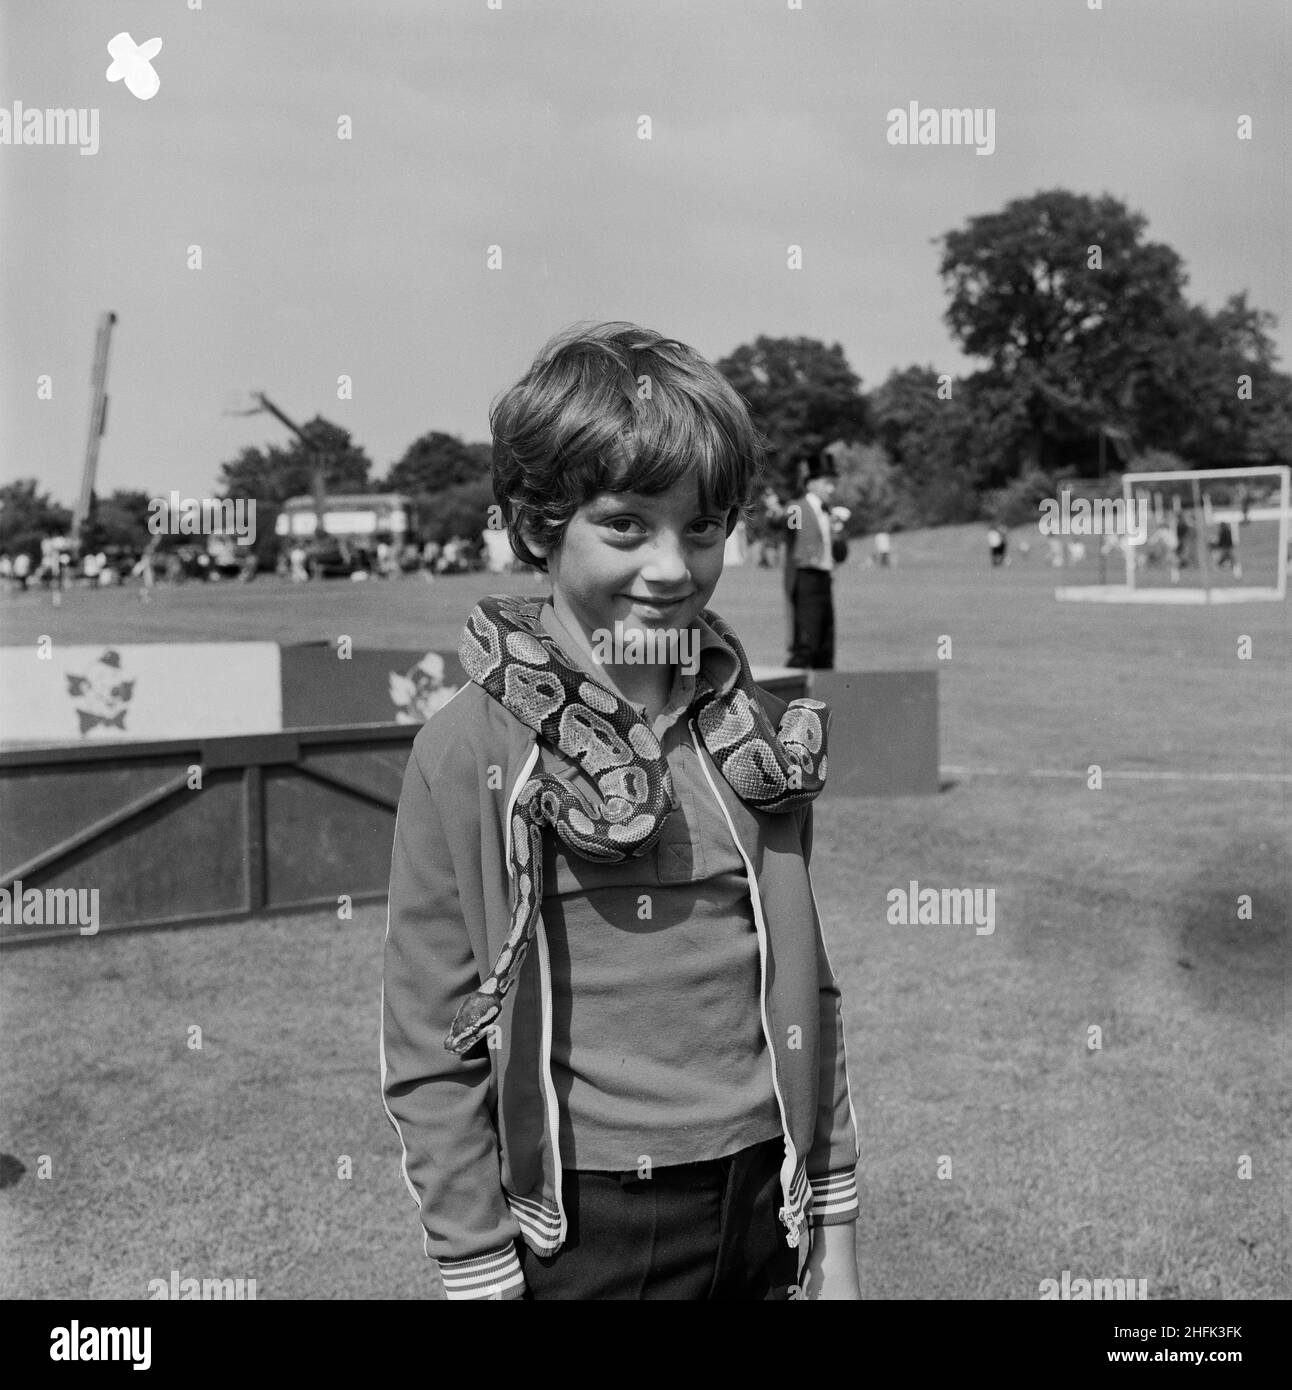 Laing Sports Ground, Rowley Lane, Elstree, Barnet, London, 16/06/1979. A smiling boy with a python wrapped around his shoulders at the annual Laing Gala Day. An article published in August 1979 in Laing's monthly newsletter 'Team Spirit' describes that Gandey's Miniature Circus attended the event with acts including performing dogs, horses, llamas and a snake. Stock Photo